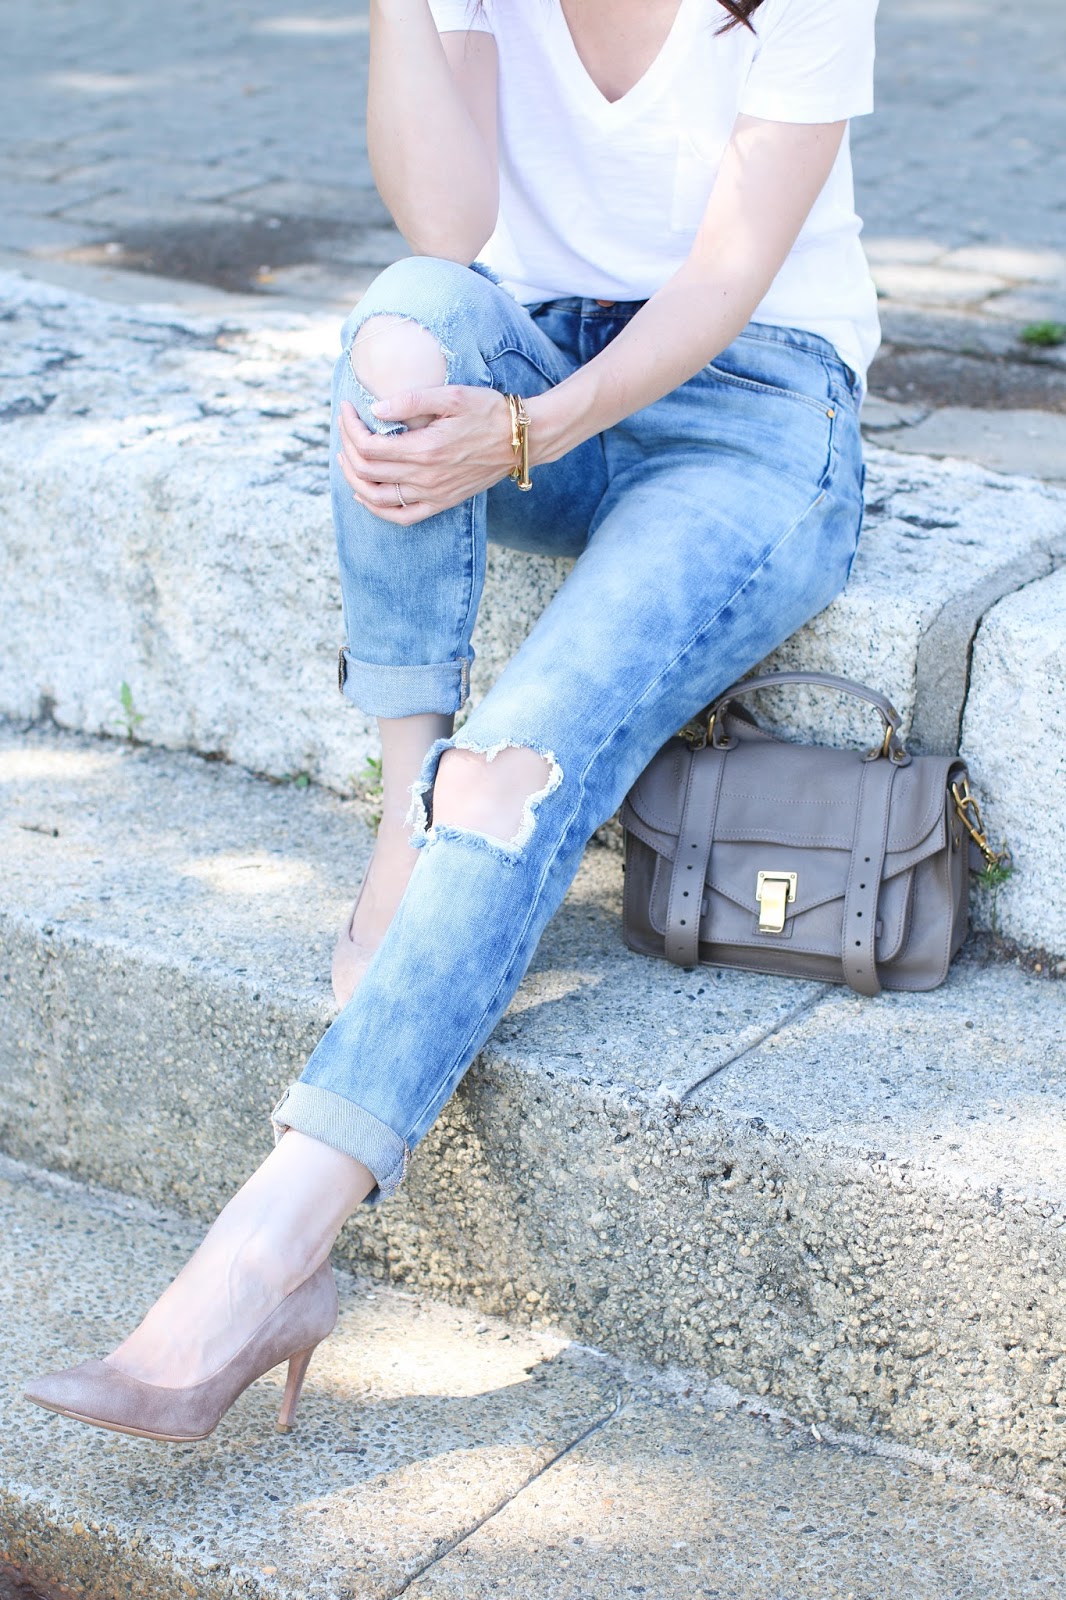 boyfriend jeans and a white tee